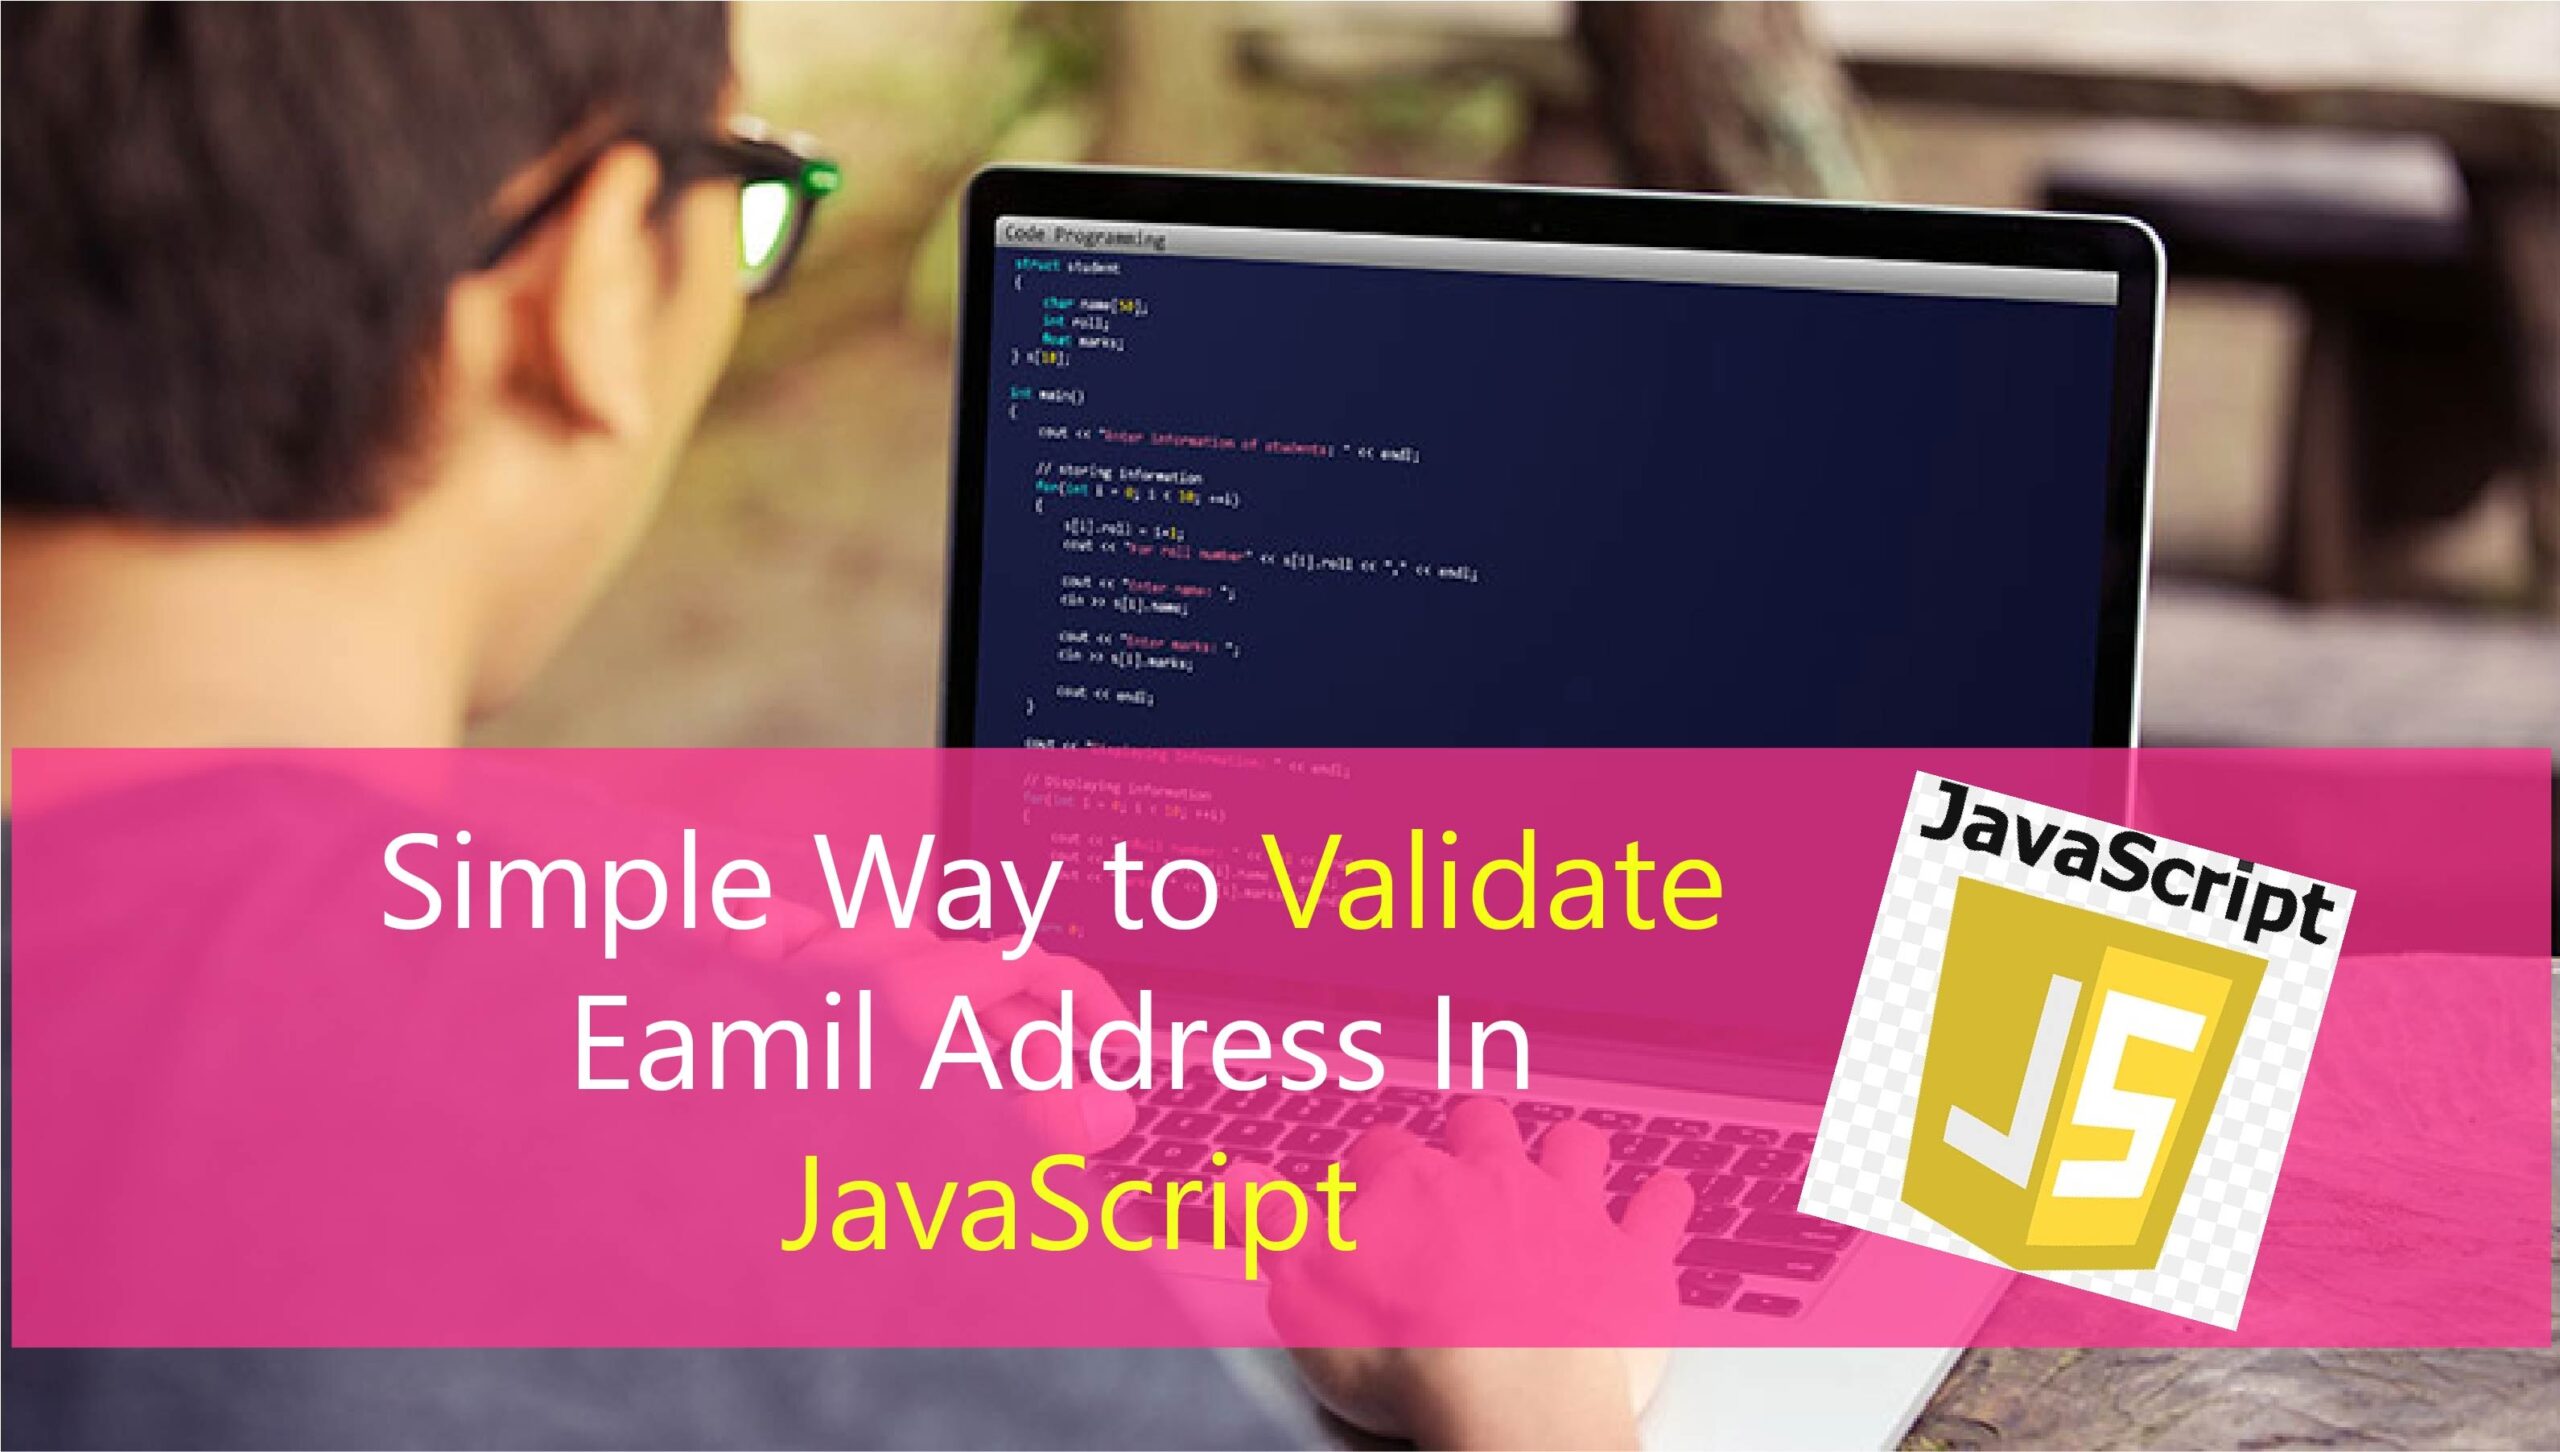 How to validate an email address in JavaScript